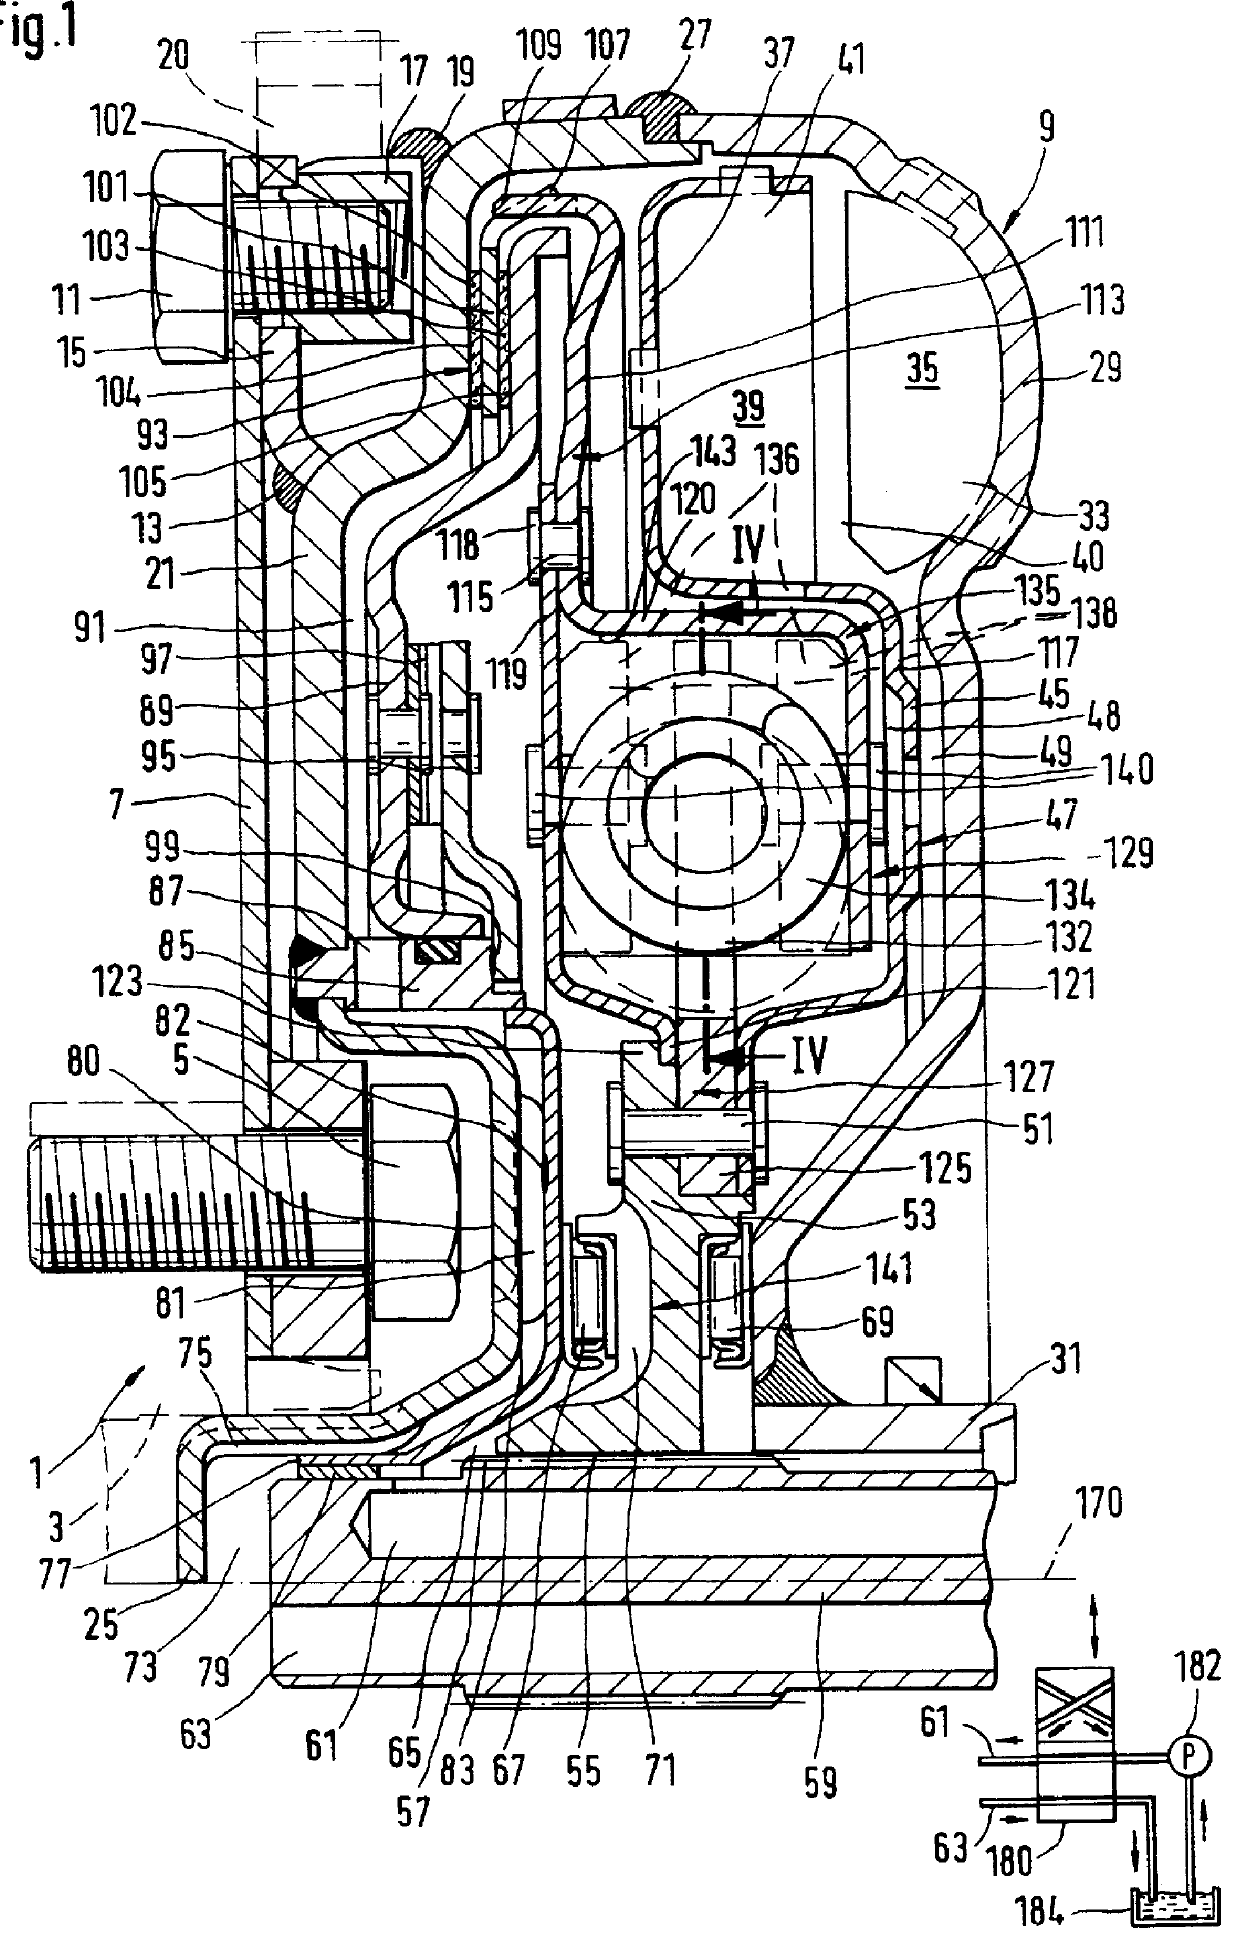 Hydrodynamic coupling device with a lockup clutch